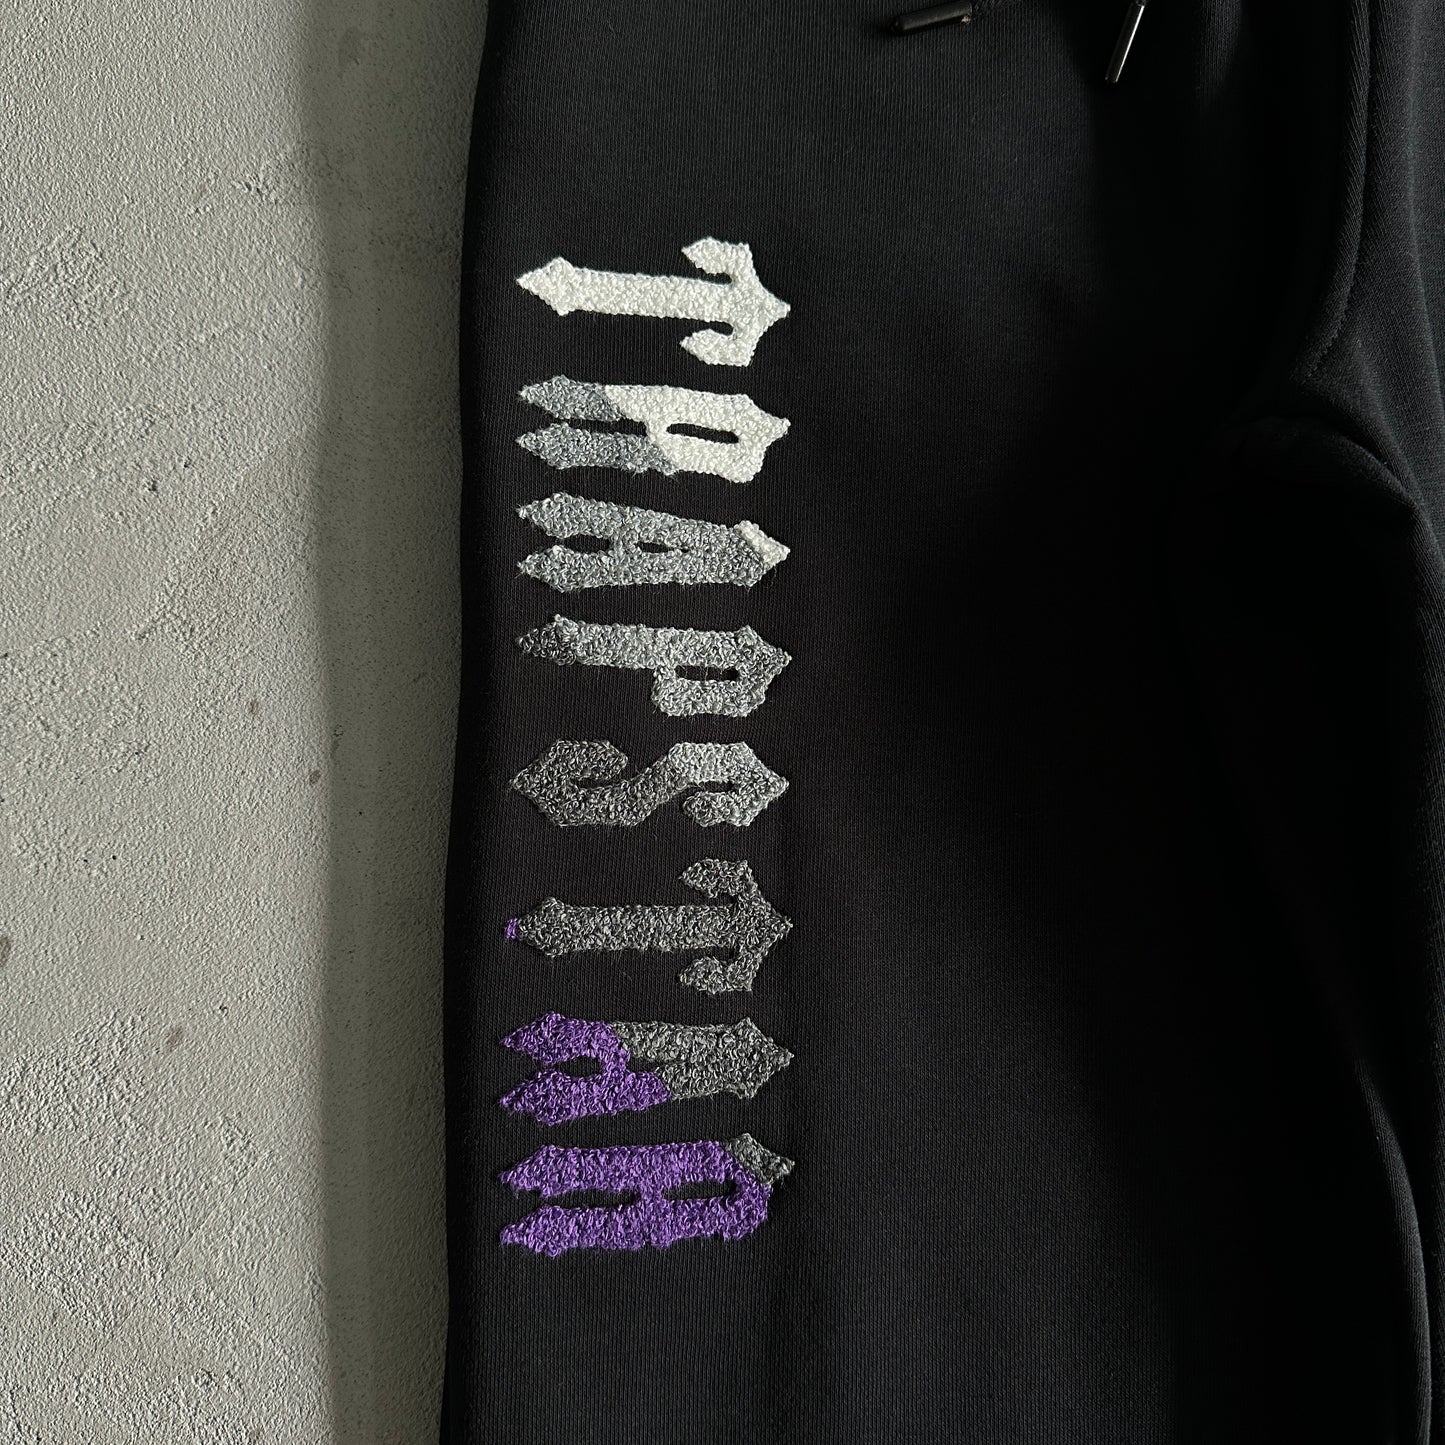 Trapstar Chenille Decoded 2.0 Hoodie Tracksuit Hoodie and Pants